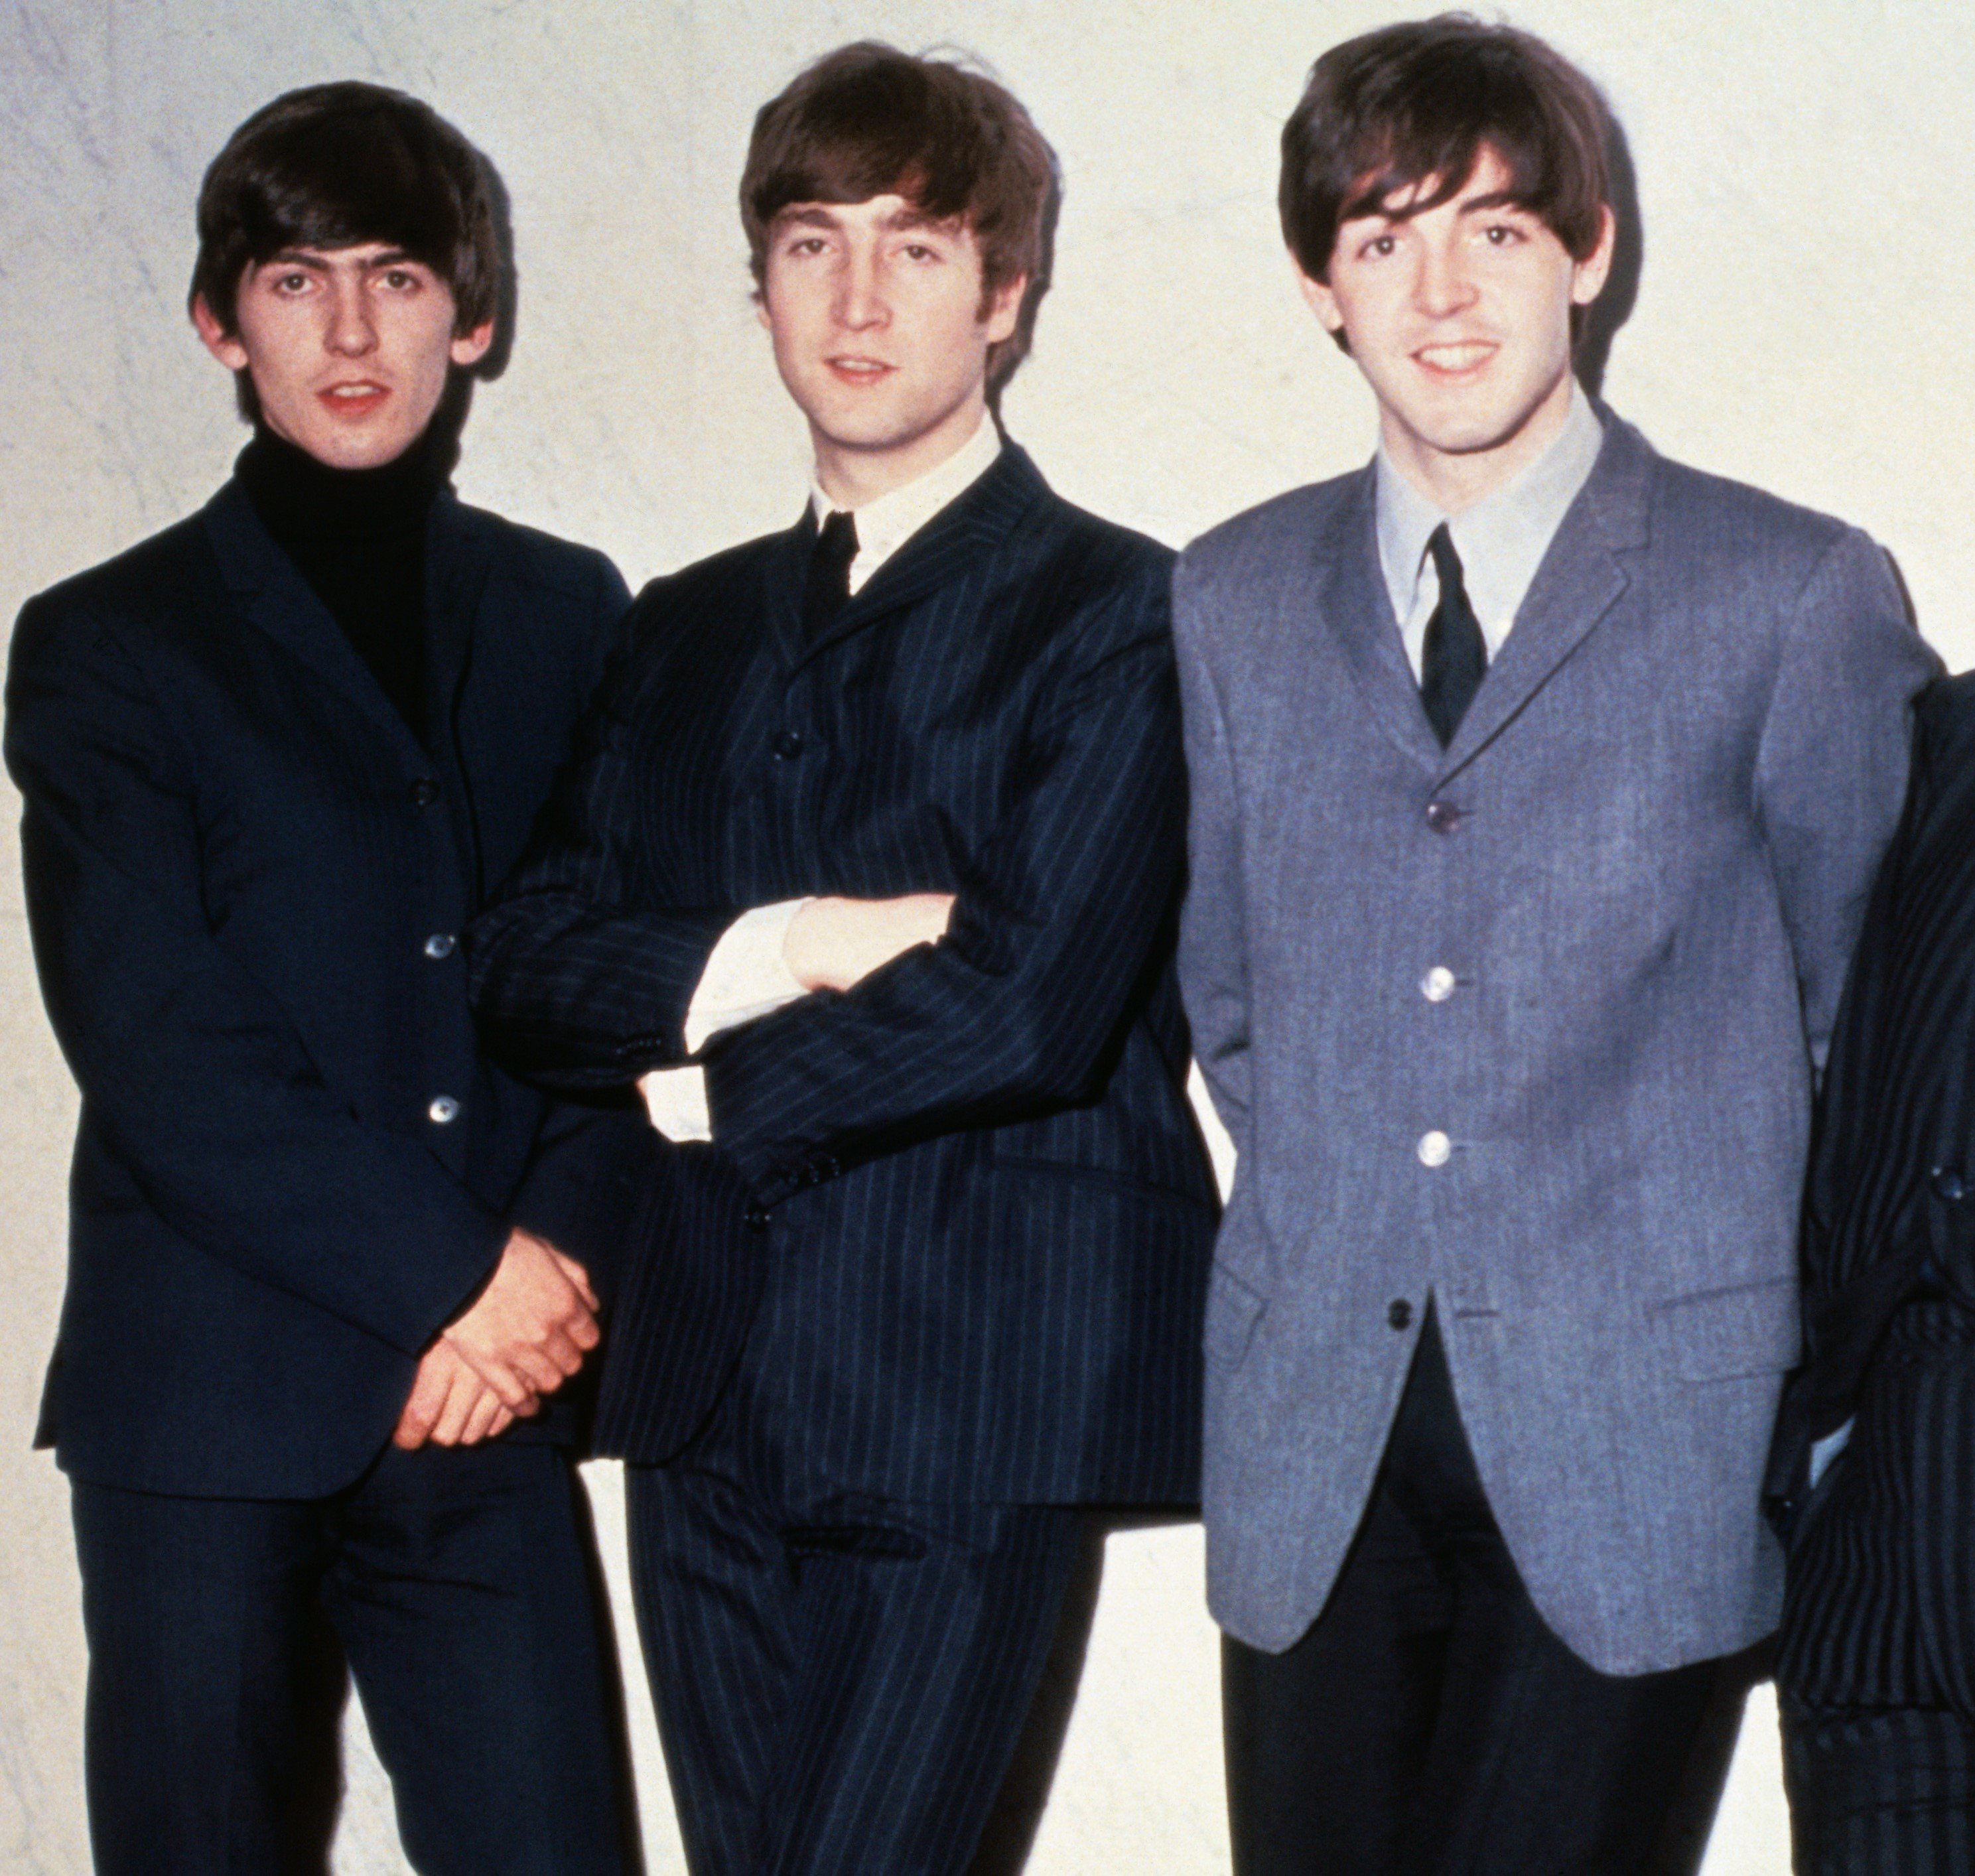 George Harrison, John Lennon and Paul McCartney of The Beatles in suits